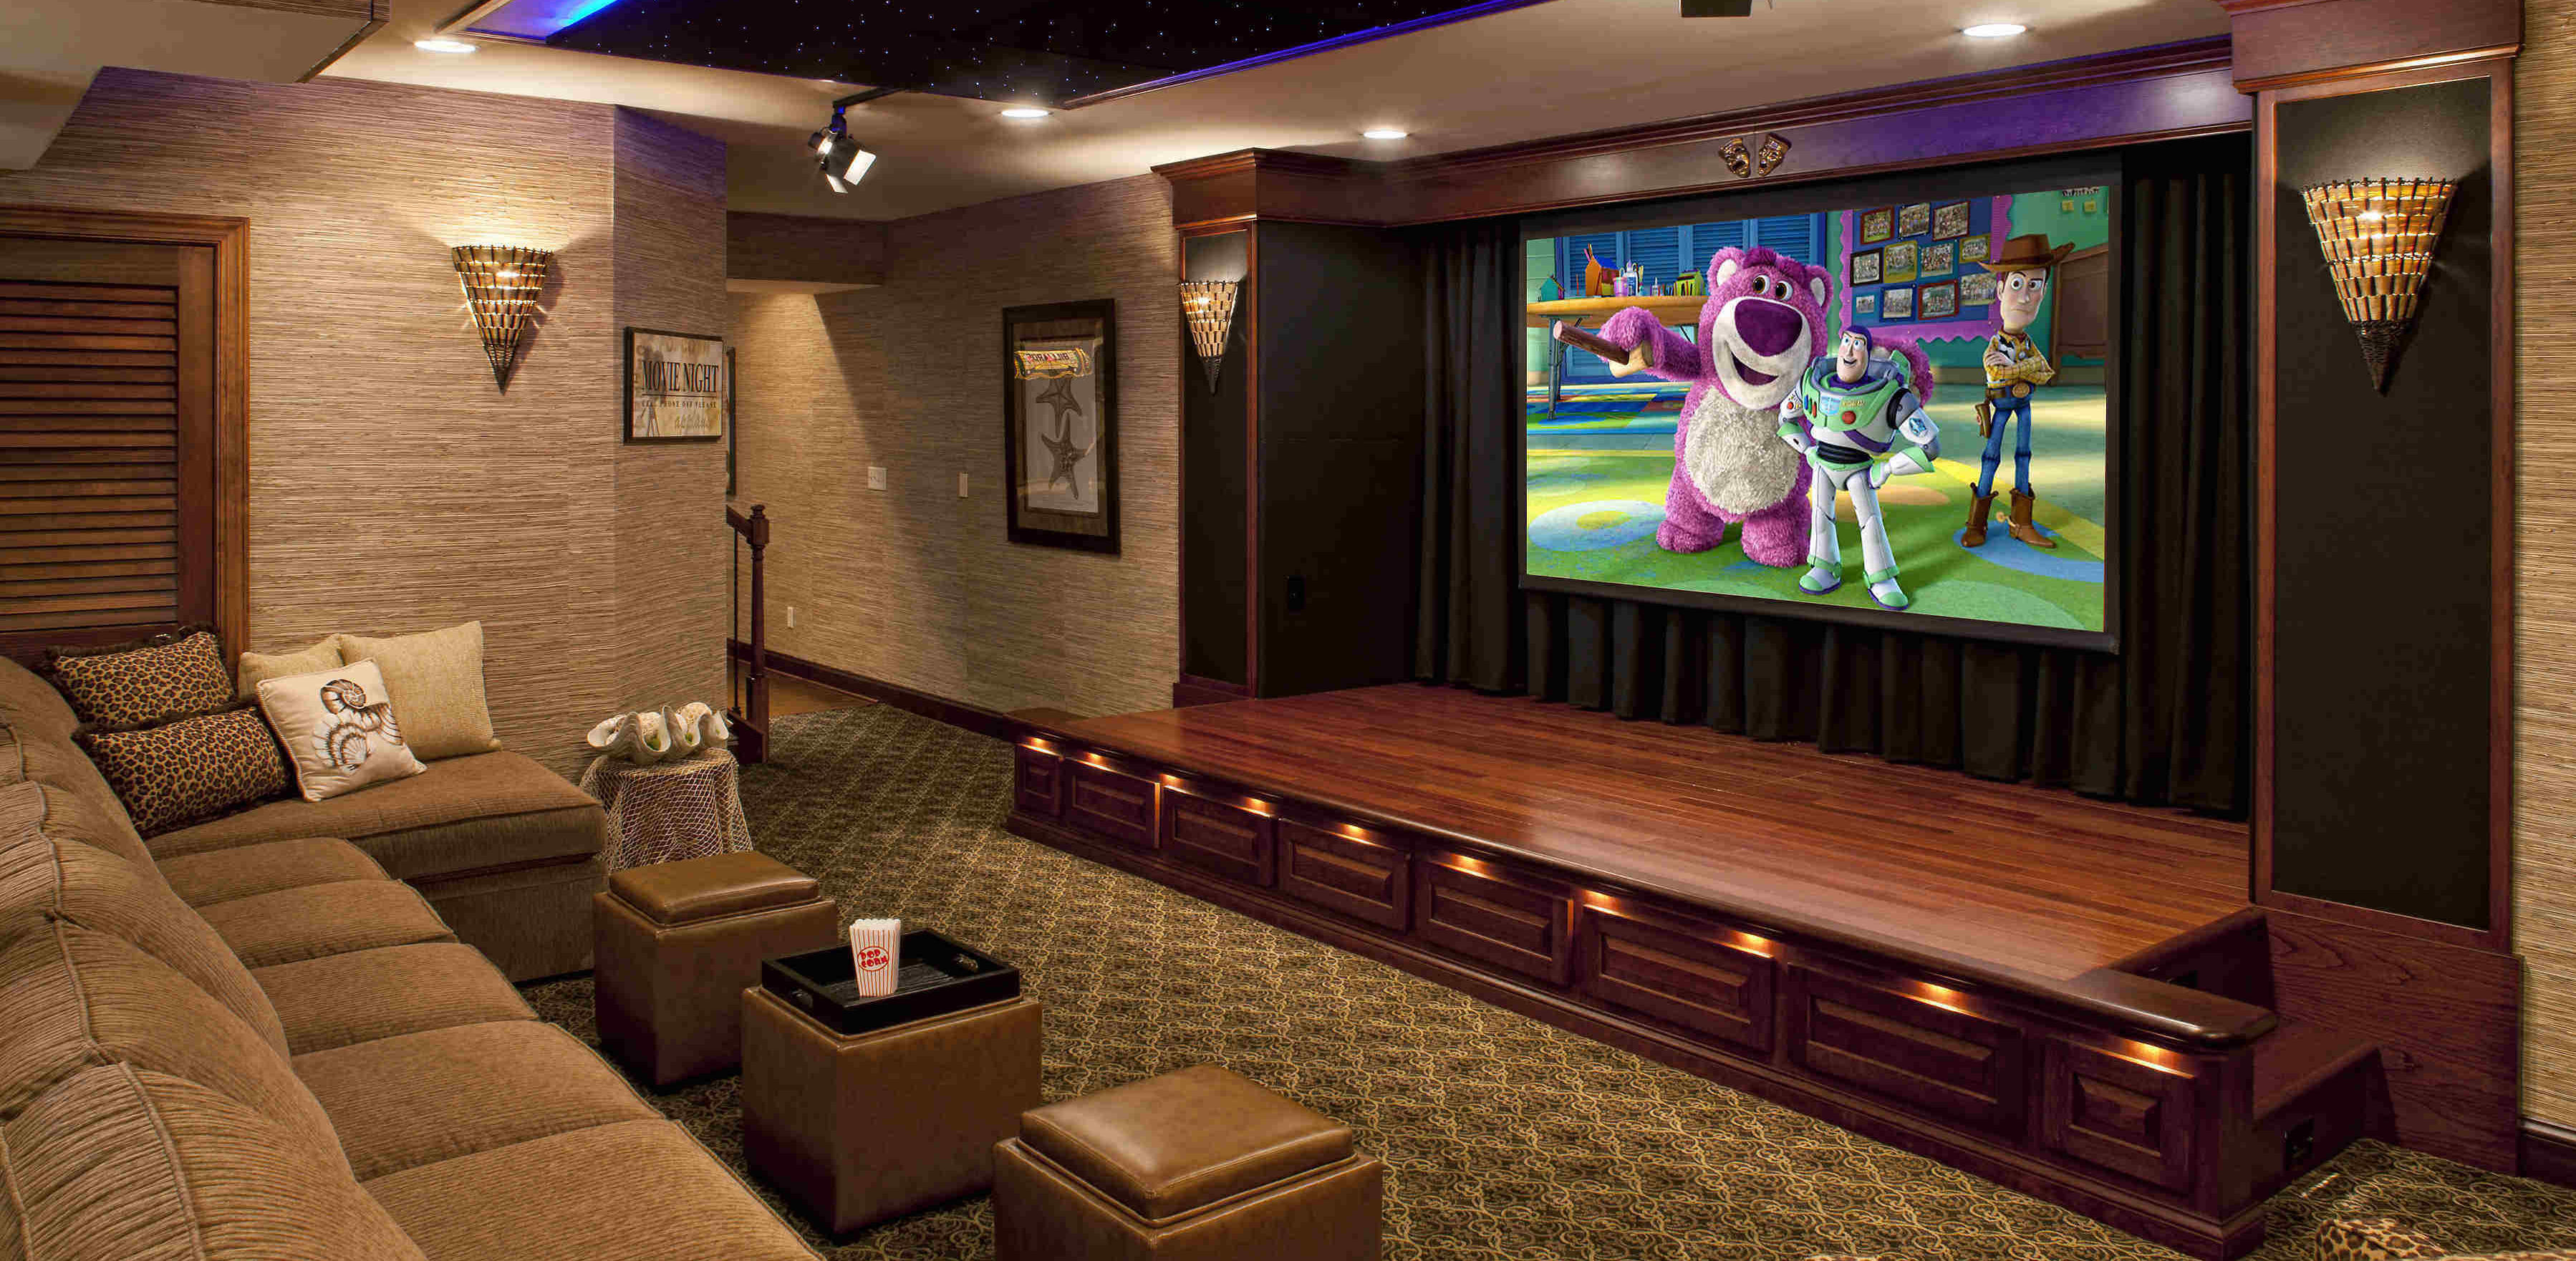 Home Theater Installation Cost Guide and Useful Tips ⎮ EarlyExperts